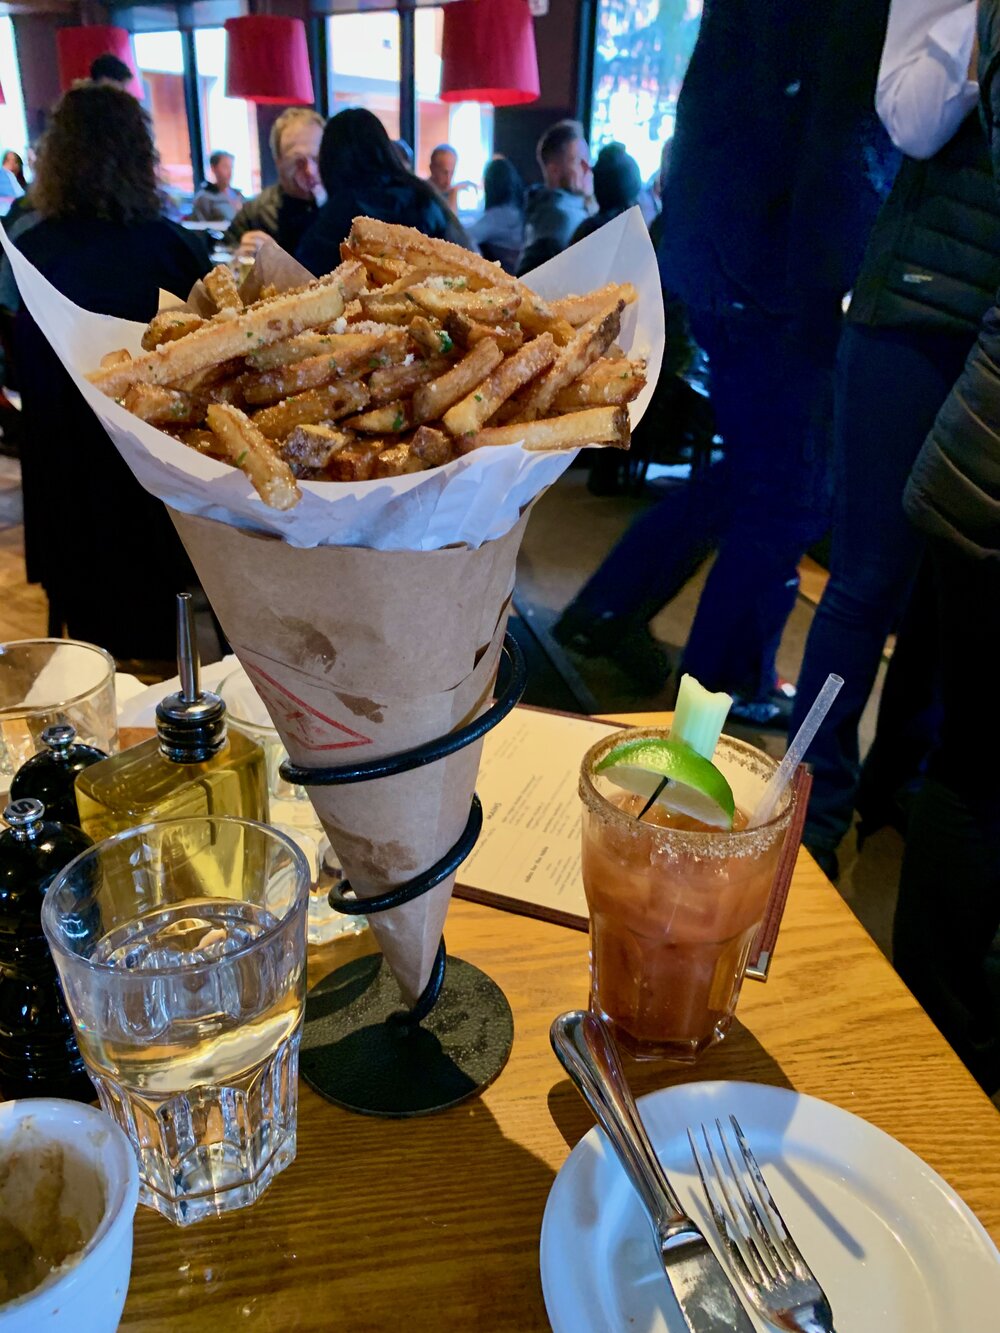 Ajax Tavern Truffle Fries are truly the BEST fries in the WORLD :)